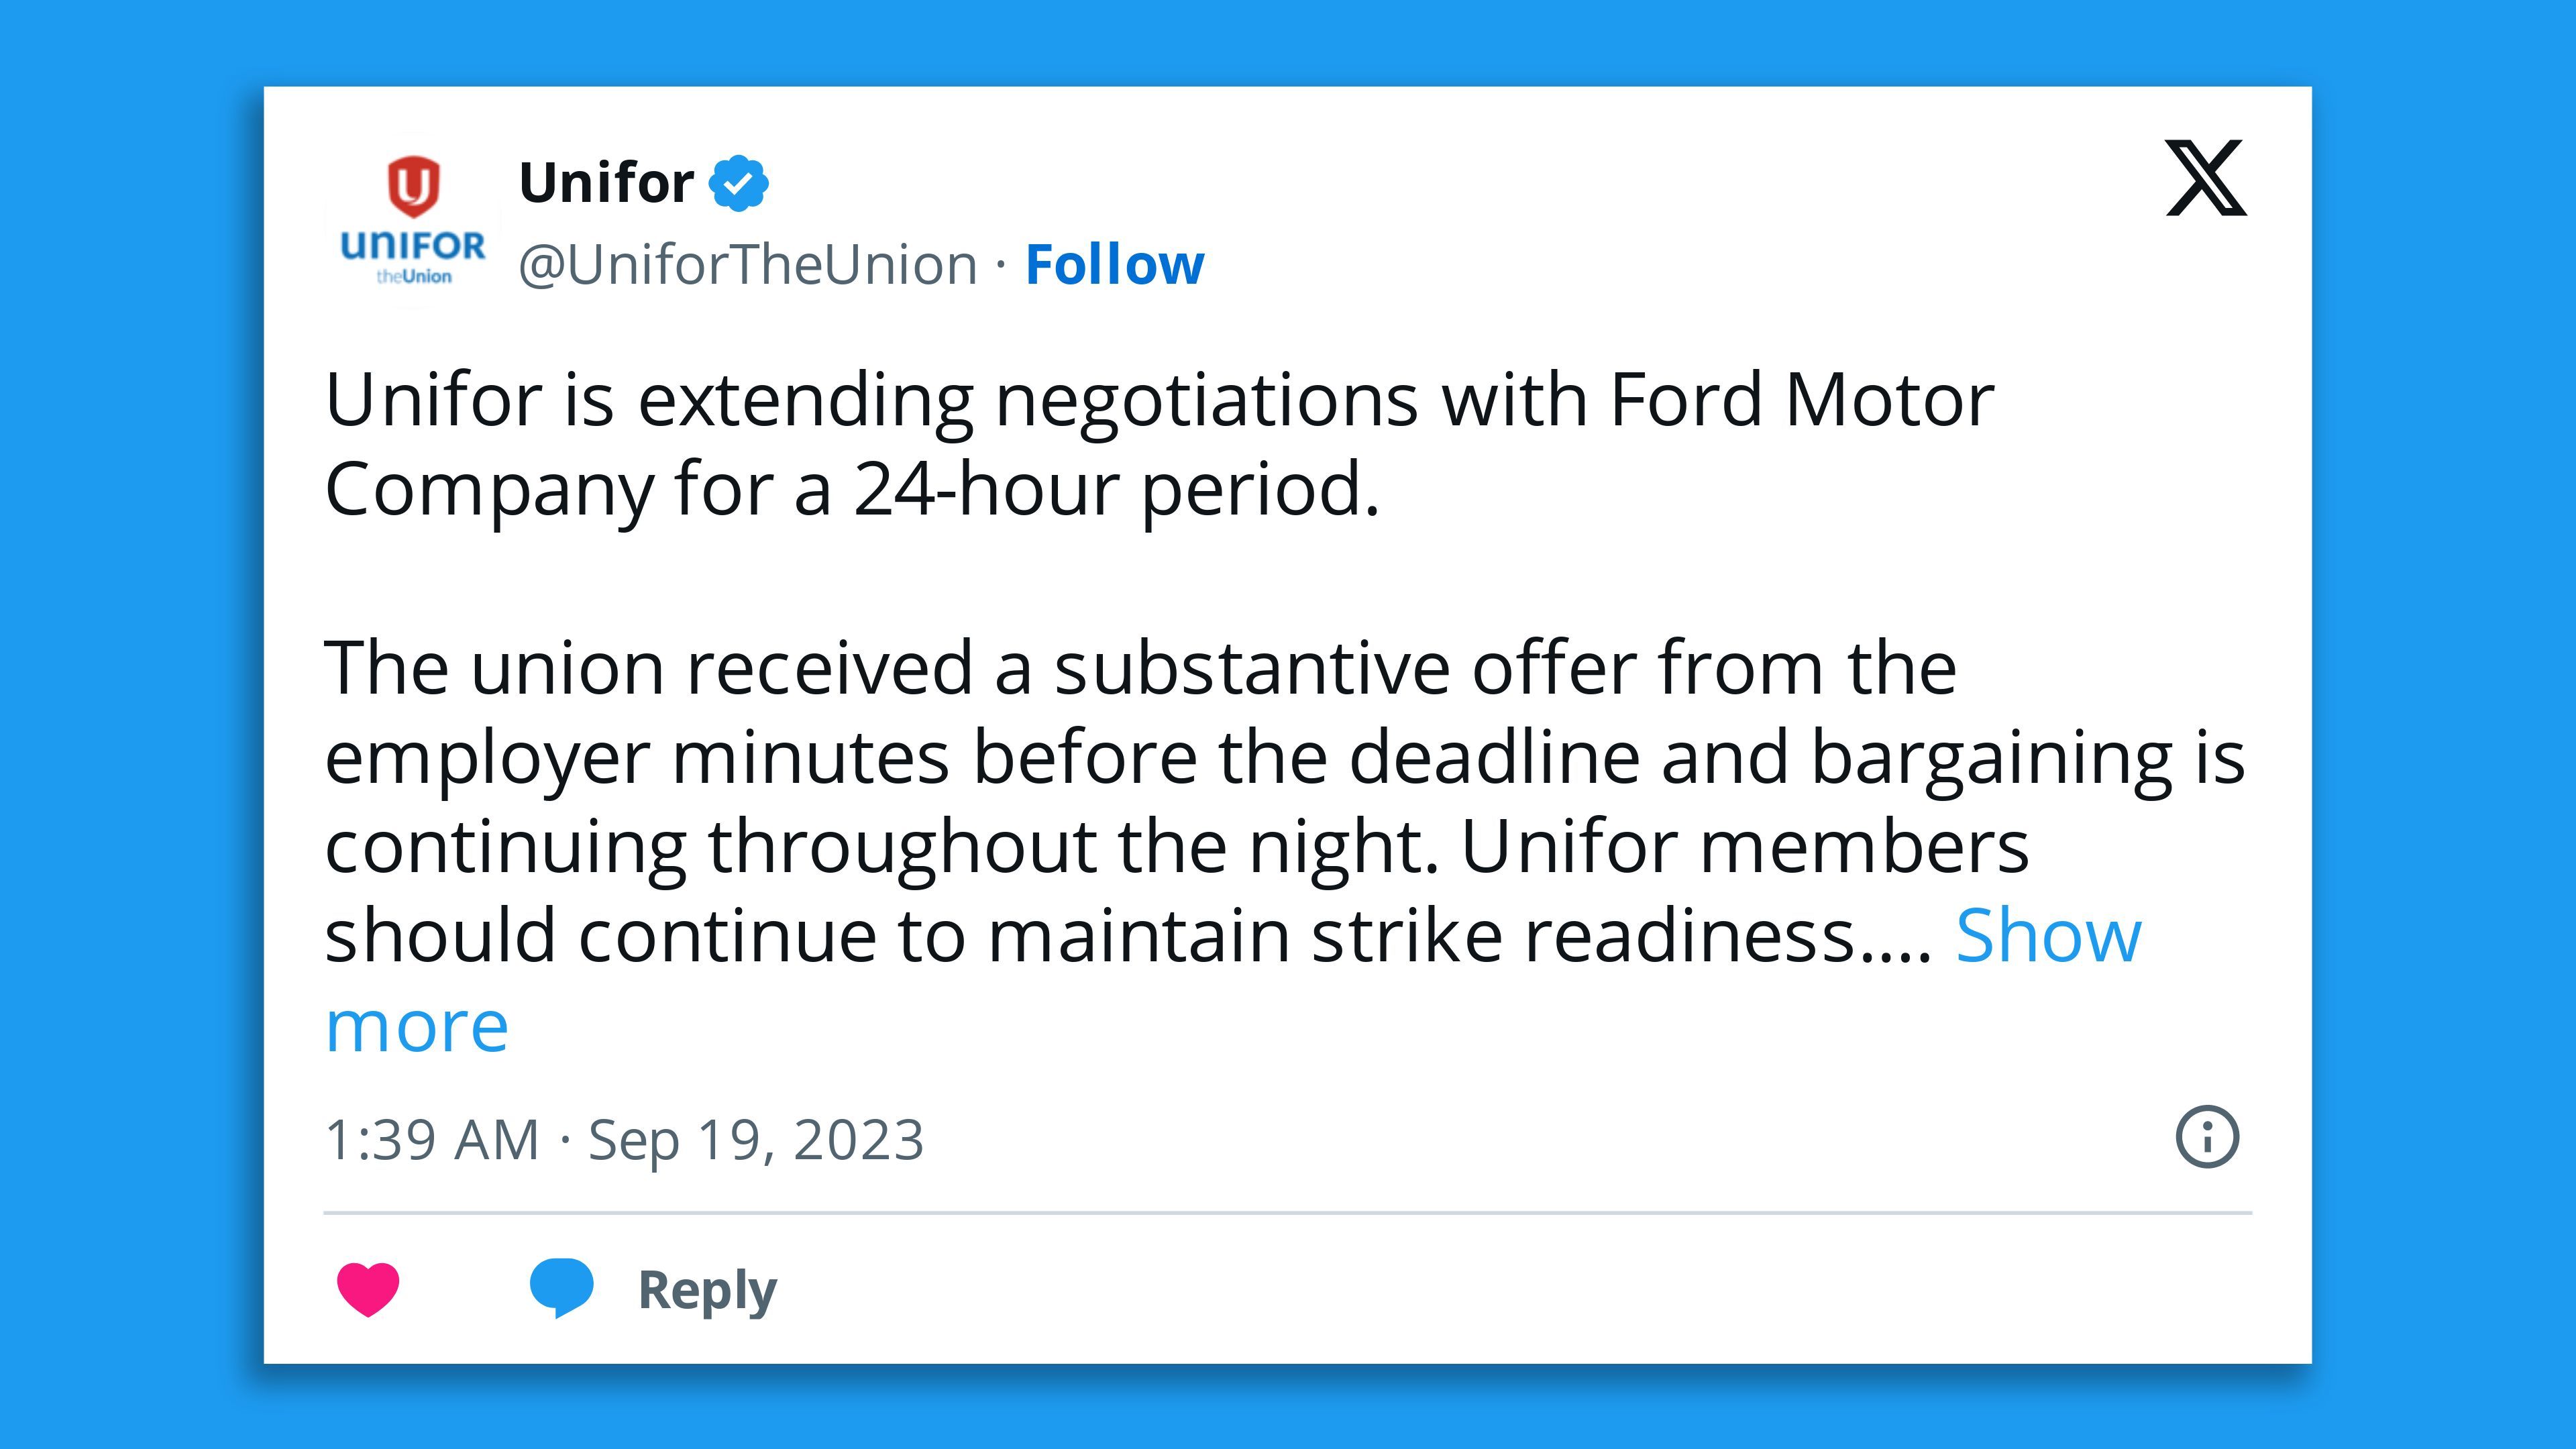 A screenshot of a tweet by the Canadian auto makers union Unifor, saying: "Unifor is extending negotiations with Ford Motor Company for a 24-hour period.   The union received a substantive offer from the employer minutes before the deadline and bargaining is continuing throughout the night. Unifor members should continue to maintain strike readiness."